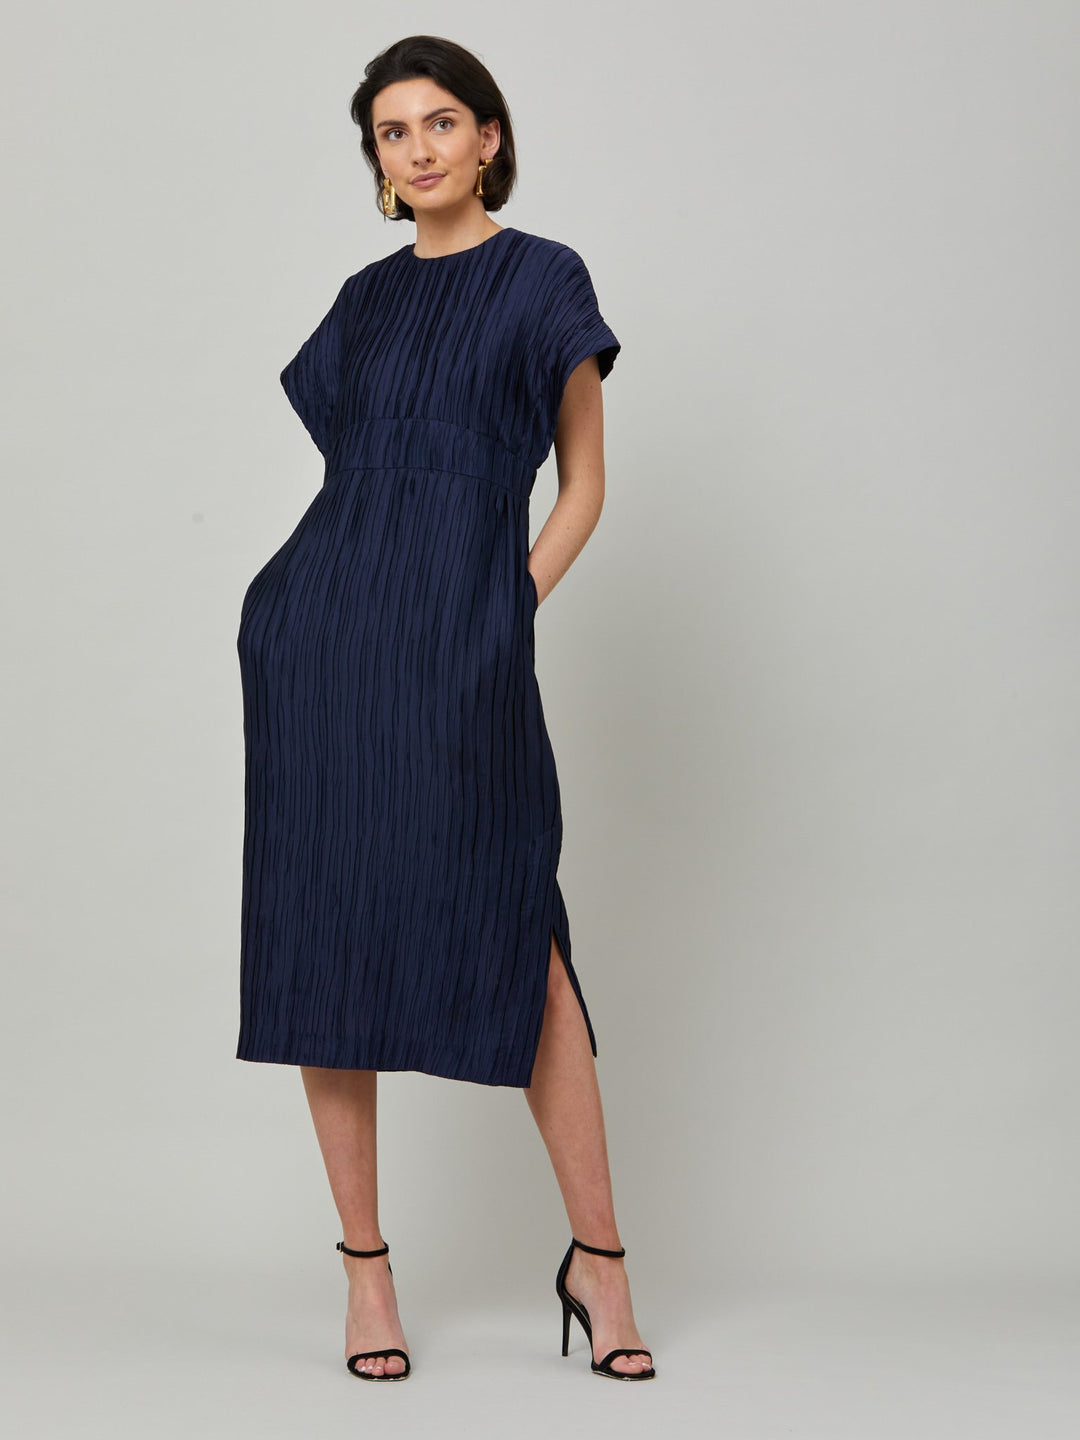 The Elegant Shiv dress redefined in a navy polished pleated fabric. An easy-fitting silhouette that falls to the mid-calf and features a side slit, pockets, and an elegant key-hole back neck detail. . Attending a summer wedding? Mother of the bride? Heading to the races? This is the dress for you.